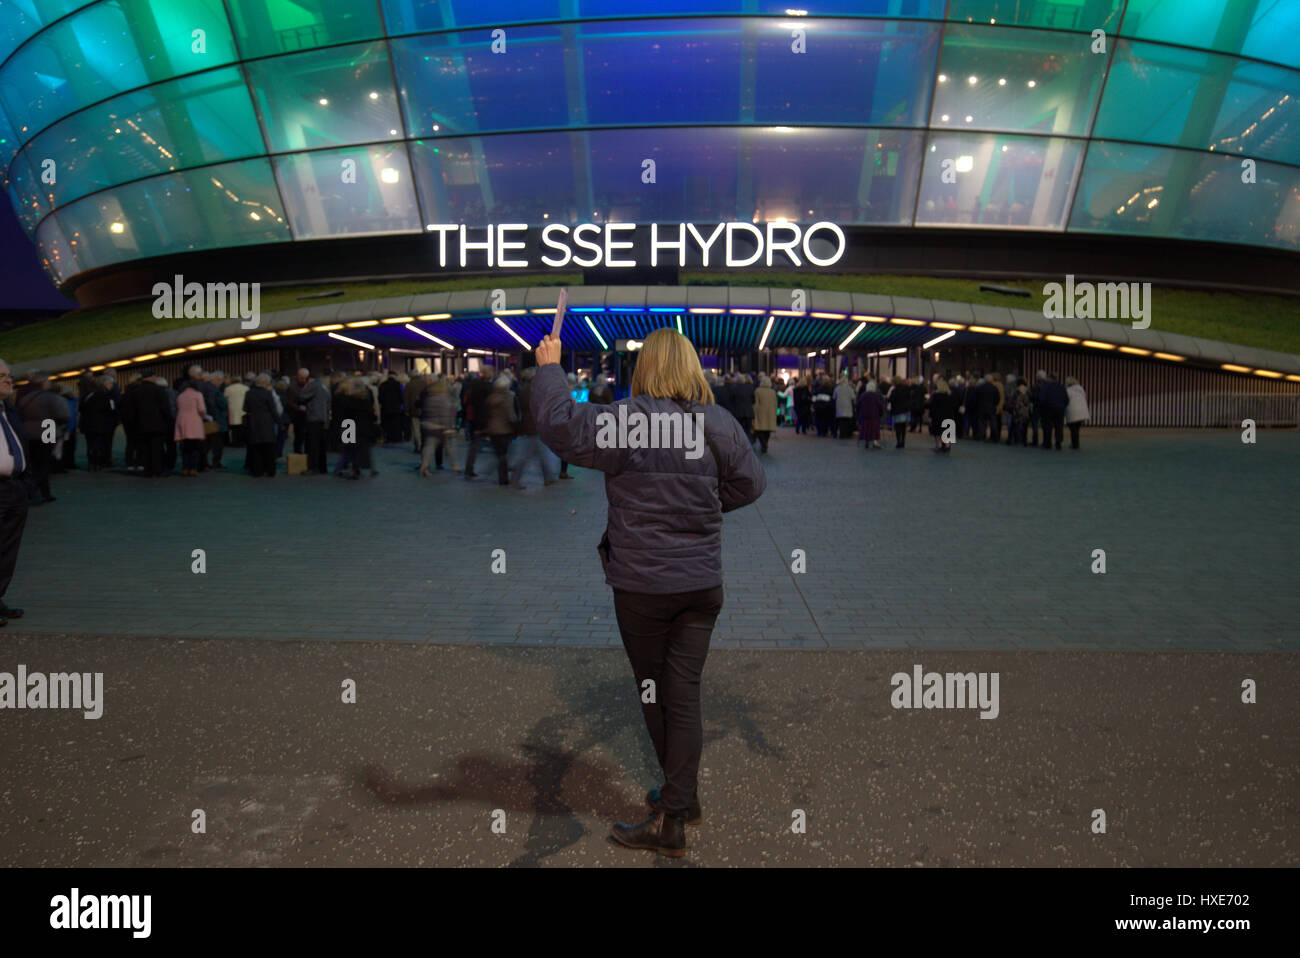 sse hydro with crowds and someone selling tickets like a ticket tout Glasgow Stock Photo